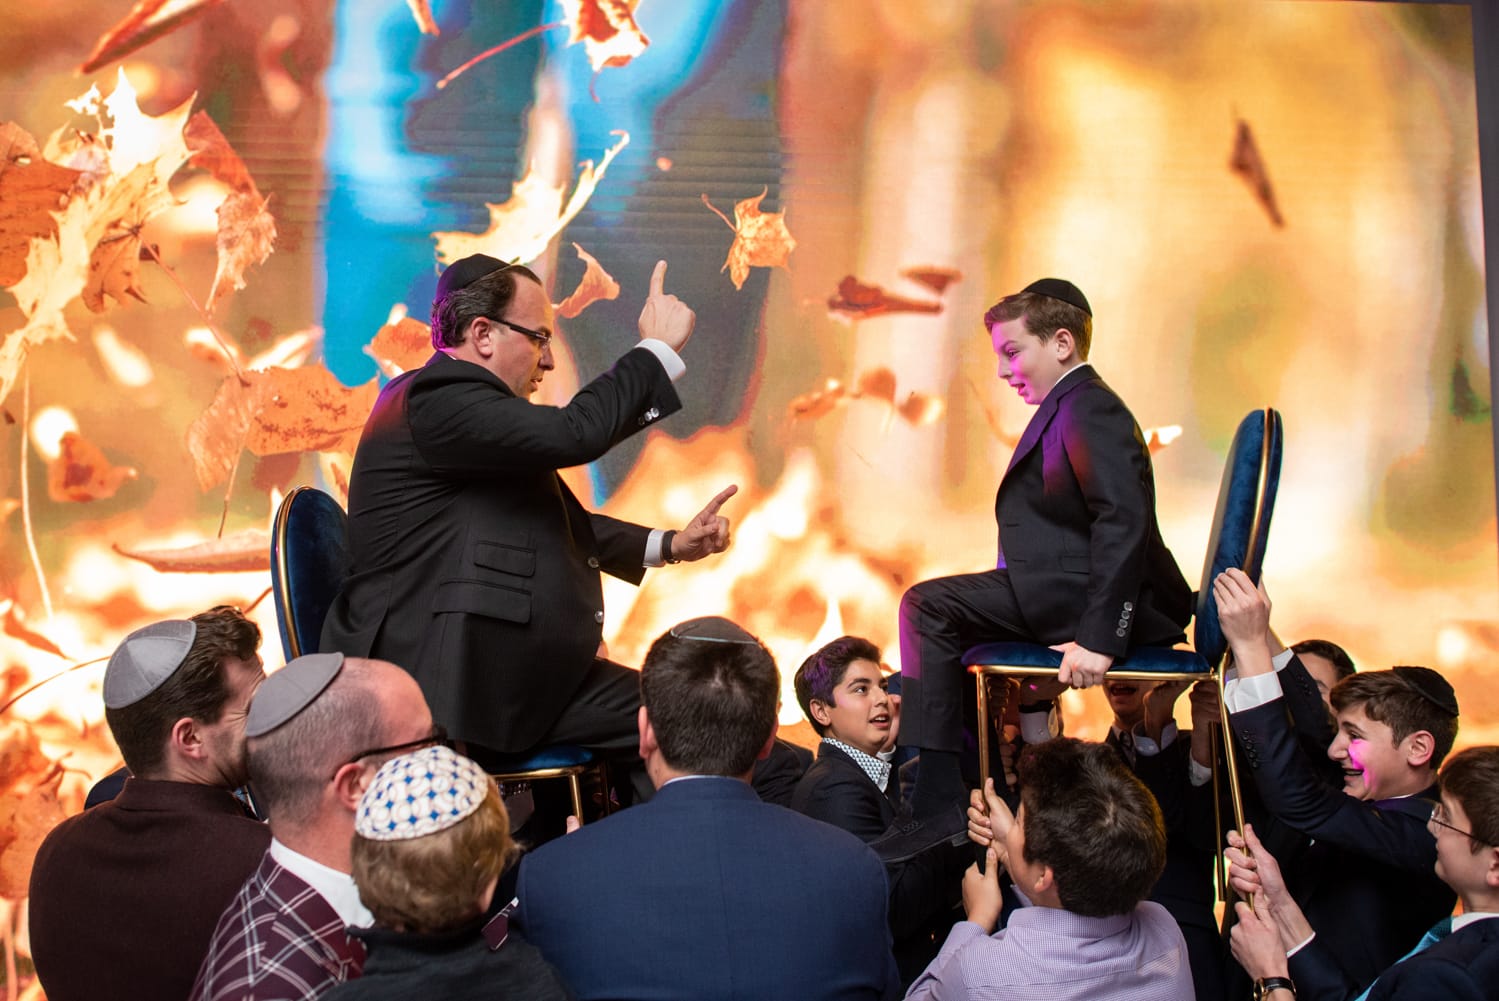 Bar mitzva boy with his dad being lifted up on chairs by men in suits at a party in front of an orange background with leaves